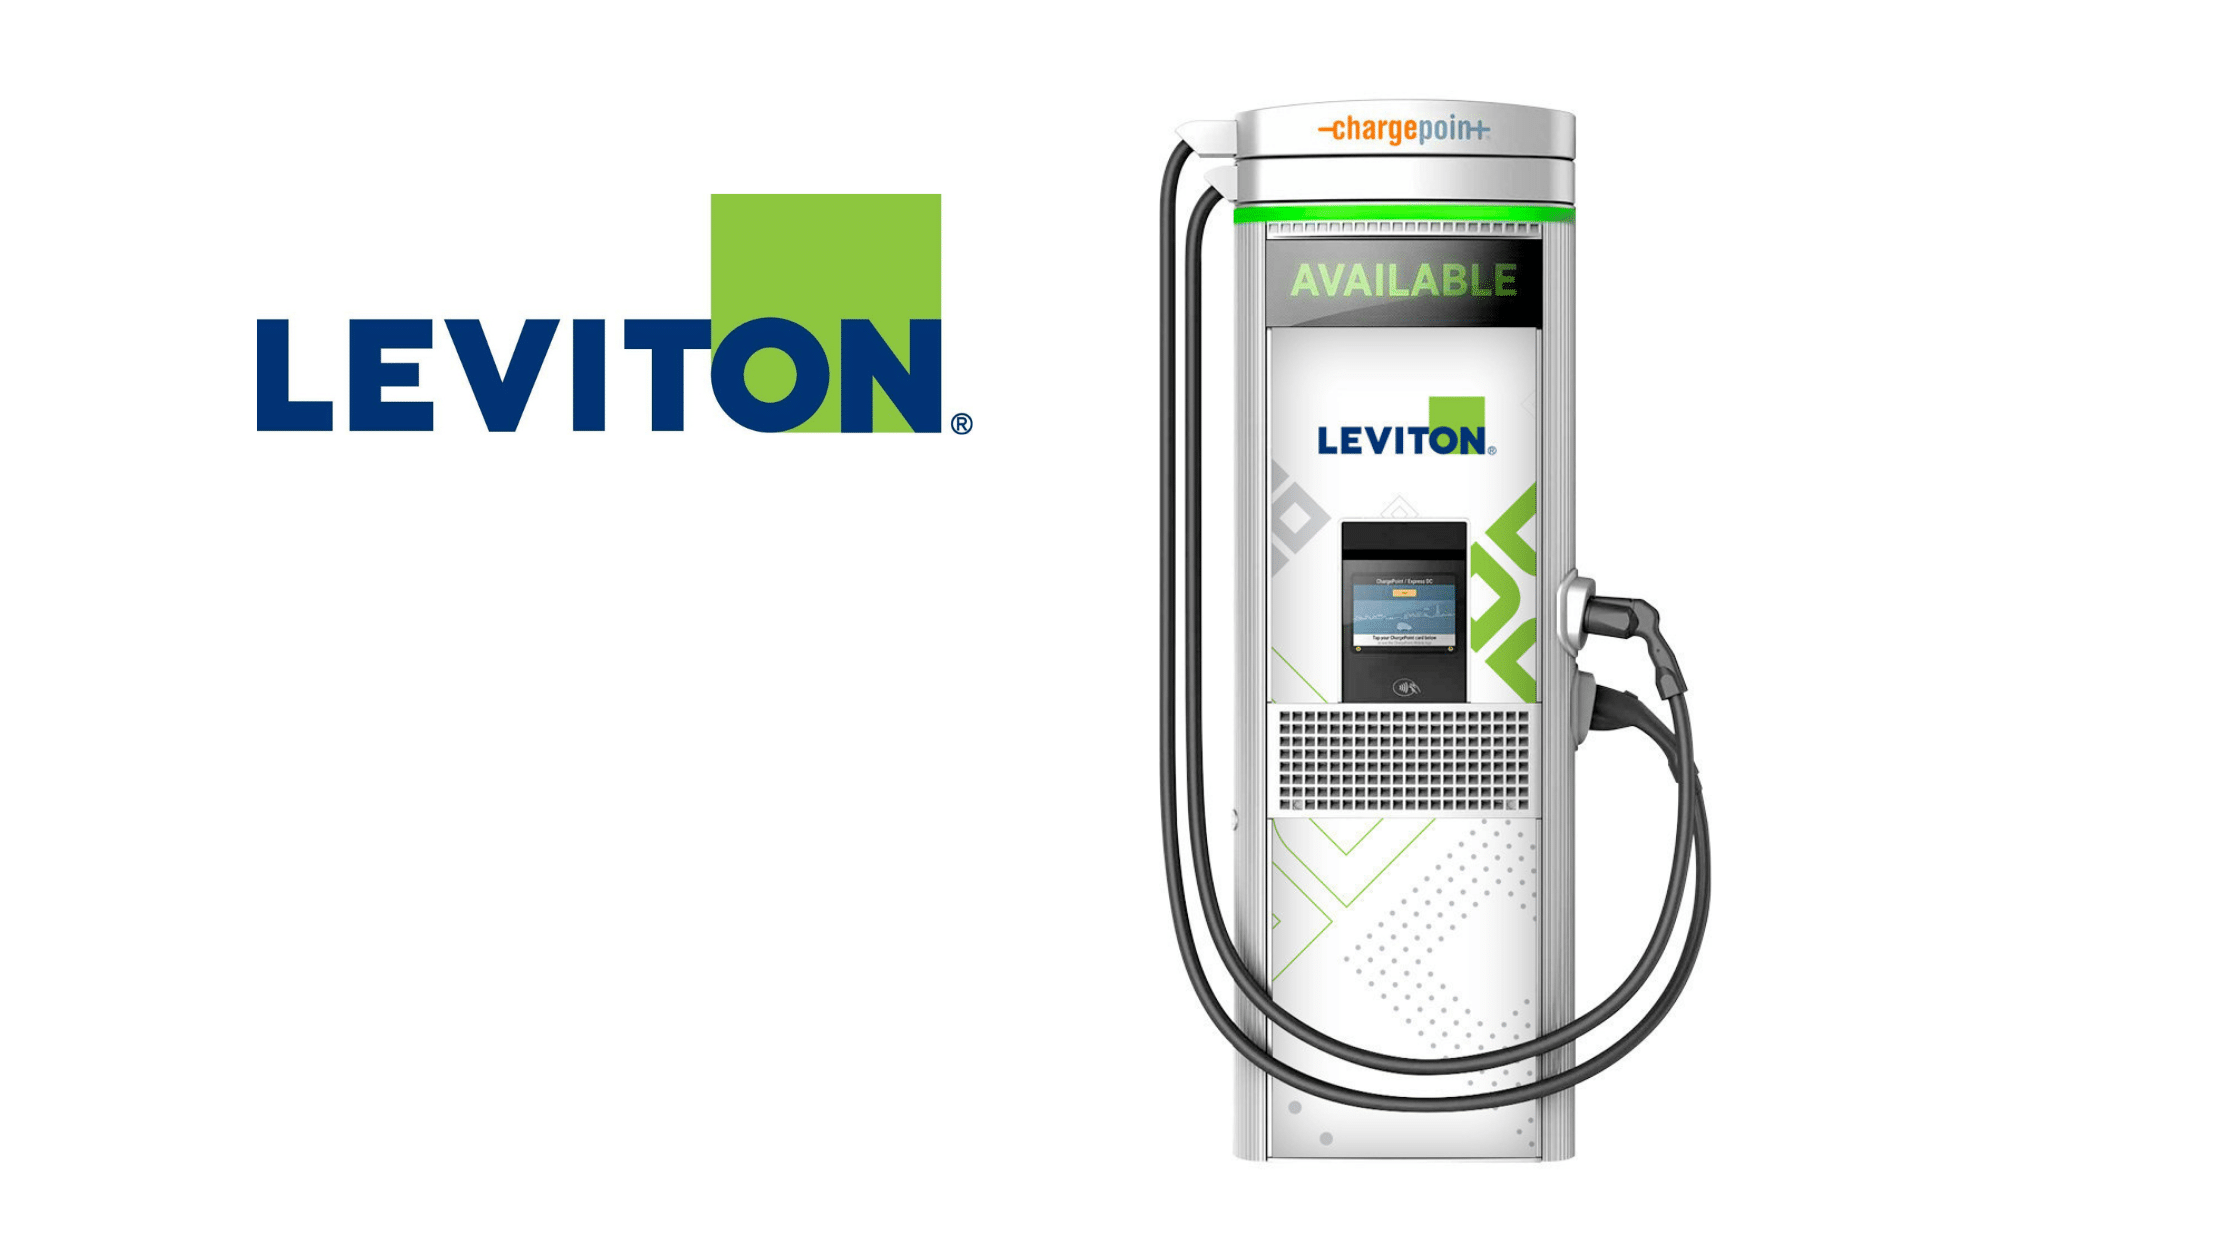 Leviton Introduces New Smart EvrGreen Electric Vehicle Charging